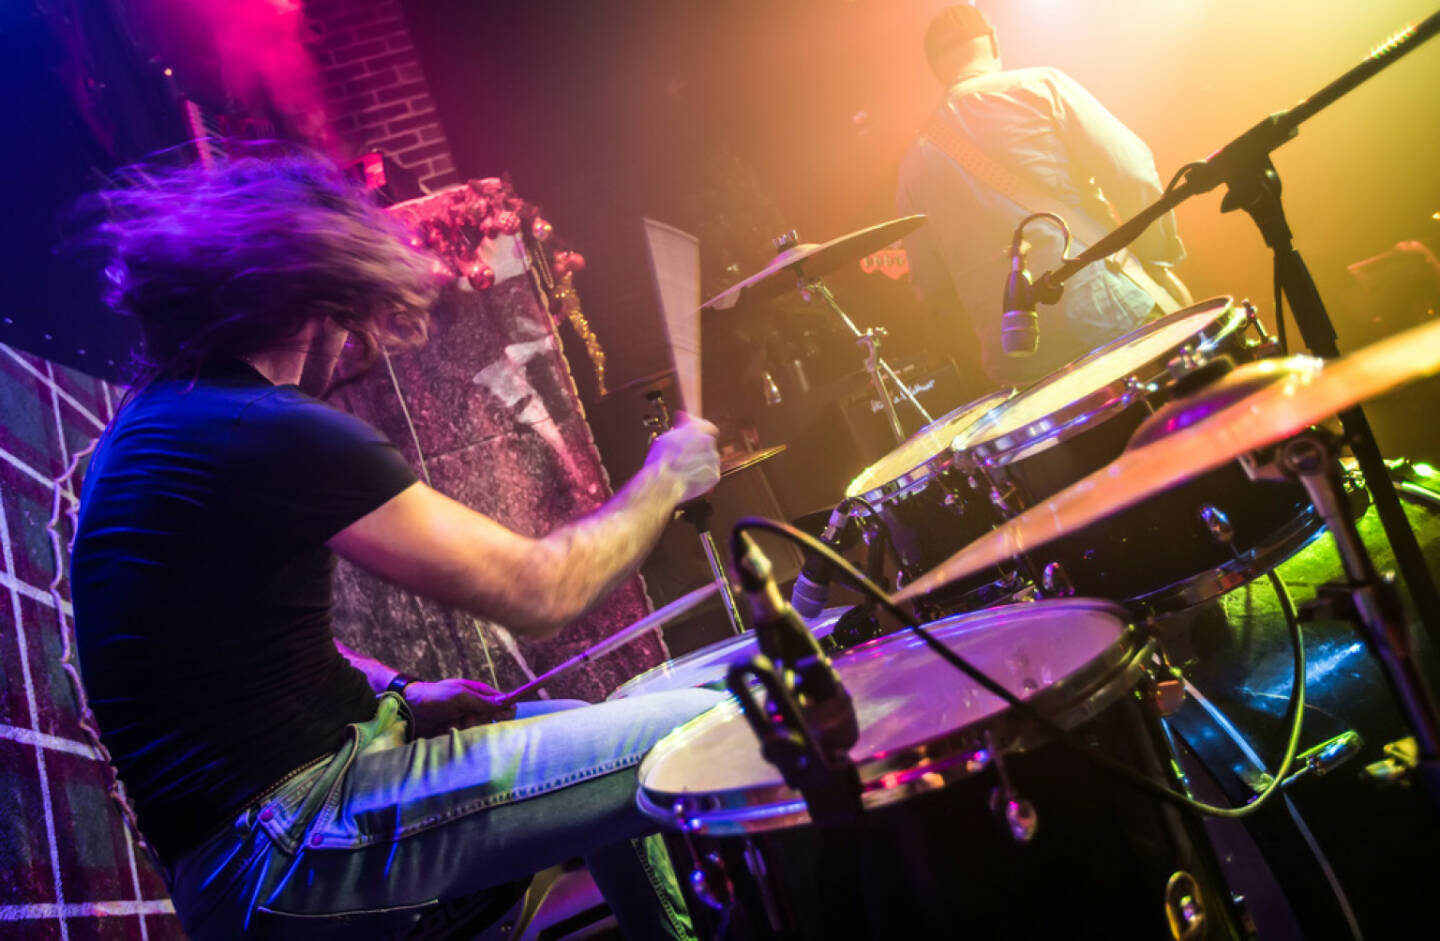 Schlagzeug, Drummer, schlagen, beat, http://www.shutterstock.com/de/pic-175919435/stock-photo-drummer-blurred-motion-playing-on-drum-set-on-stage-focus-on-the-drum-and-microphone.html 